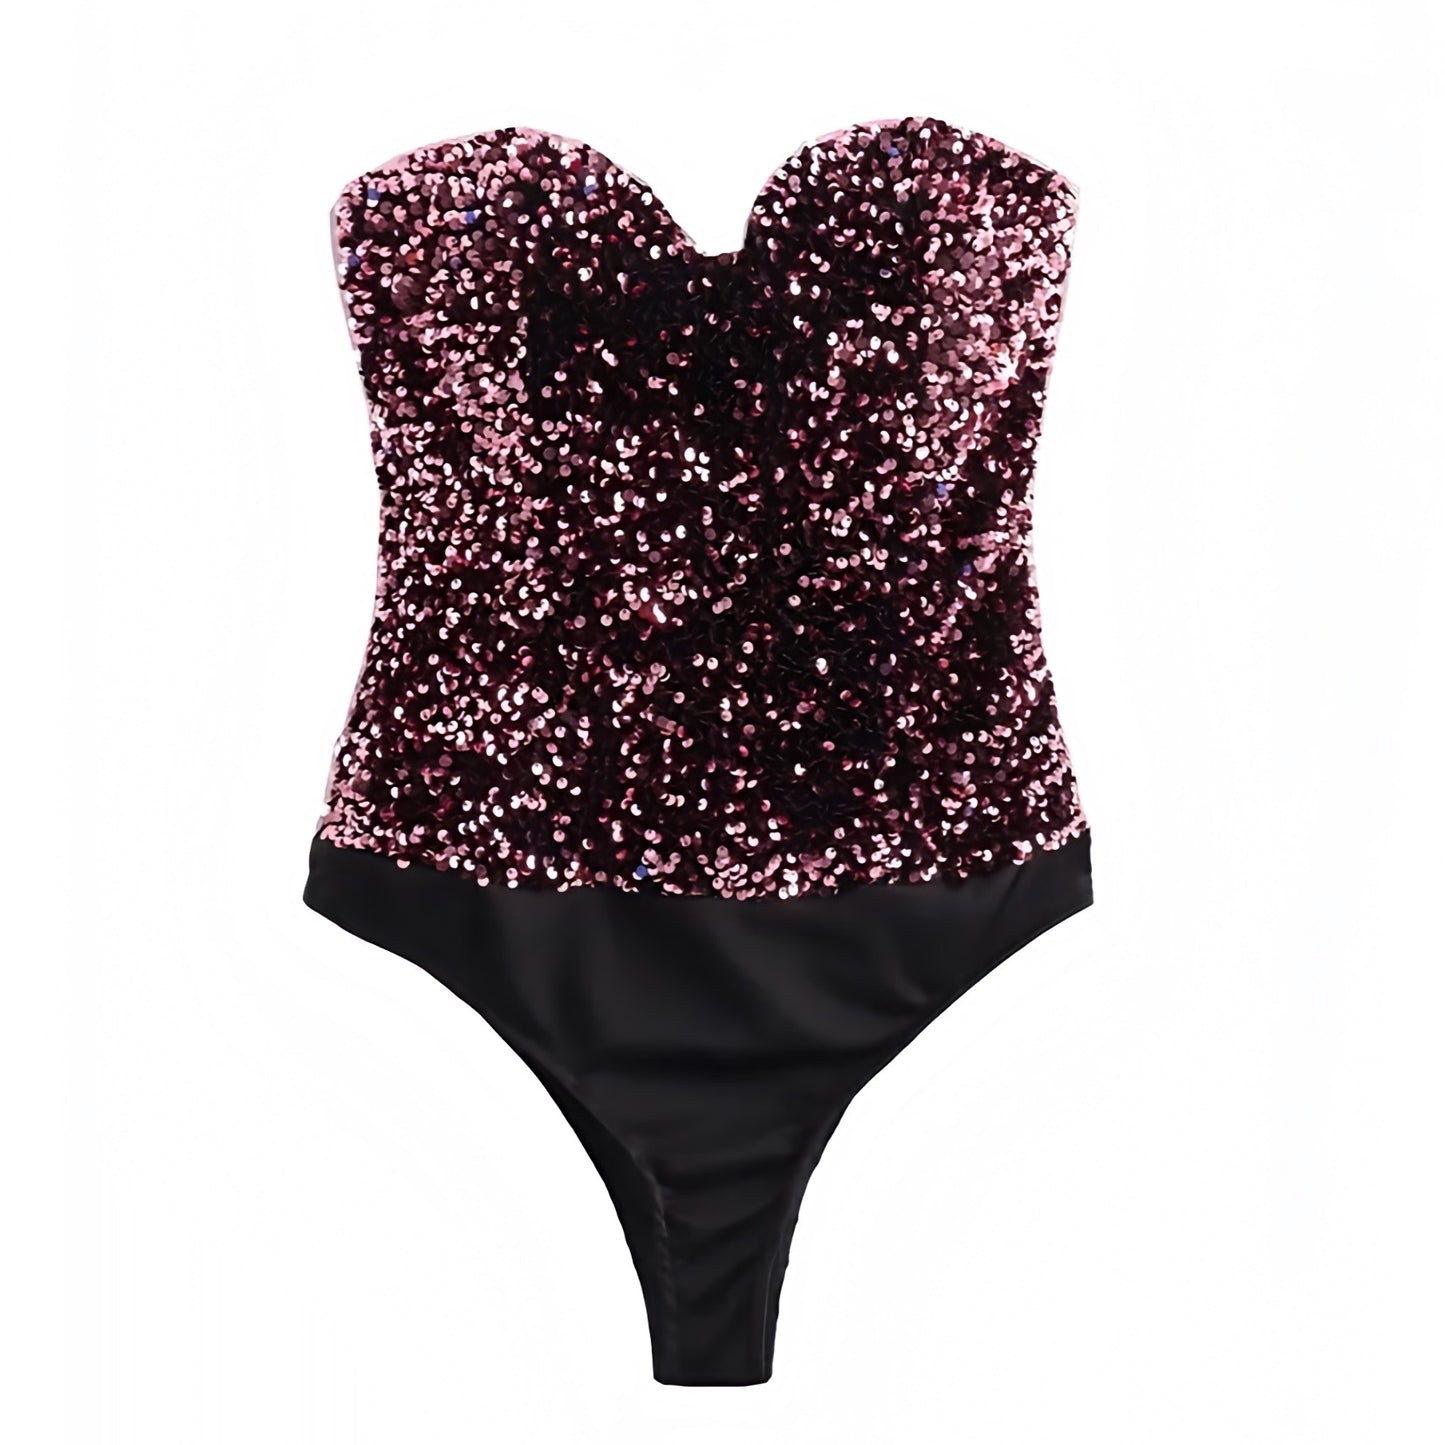 purple-plum-wine-sangria-sequined-glitter-sparkly-slim-fit-corset-bodycon-bustier-fitted-bodice-sweetheart-neckline-strapless-sleeveless-bandeau-one-piece-bodysuit-top-women-ladies-chic-trendy-spring-2024-summer-elegant-casual-semi-formal-feminine-classy-party-gala-date-night-out-sexy-evening-cocktail-club-wear-zara-revolve-aritzia-whitefox-edikted-princess-polly-iamgia-areyouami